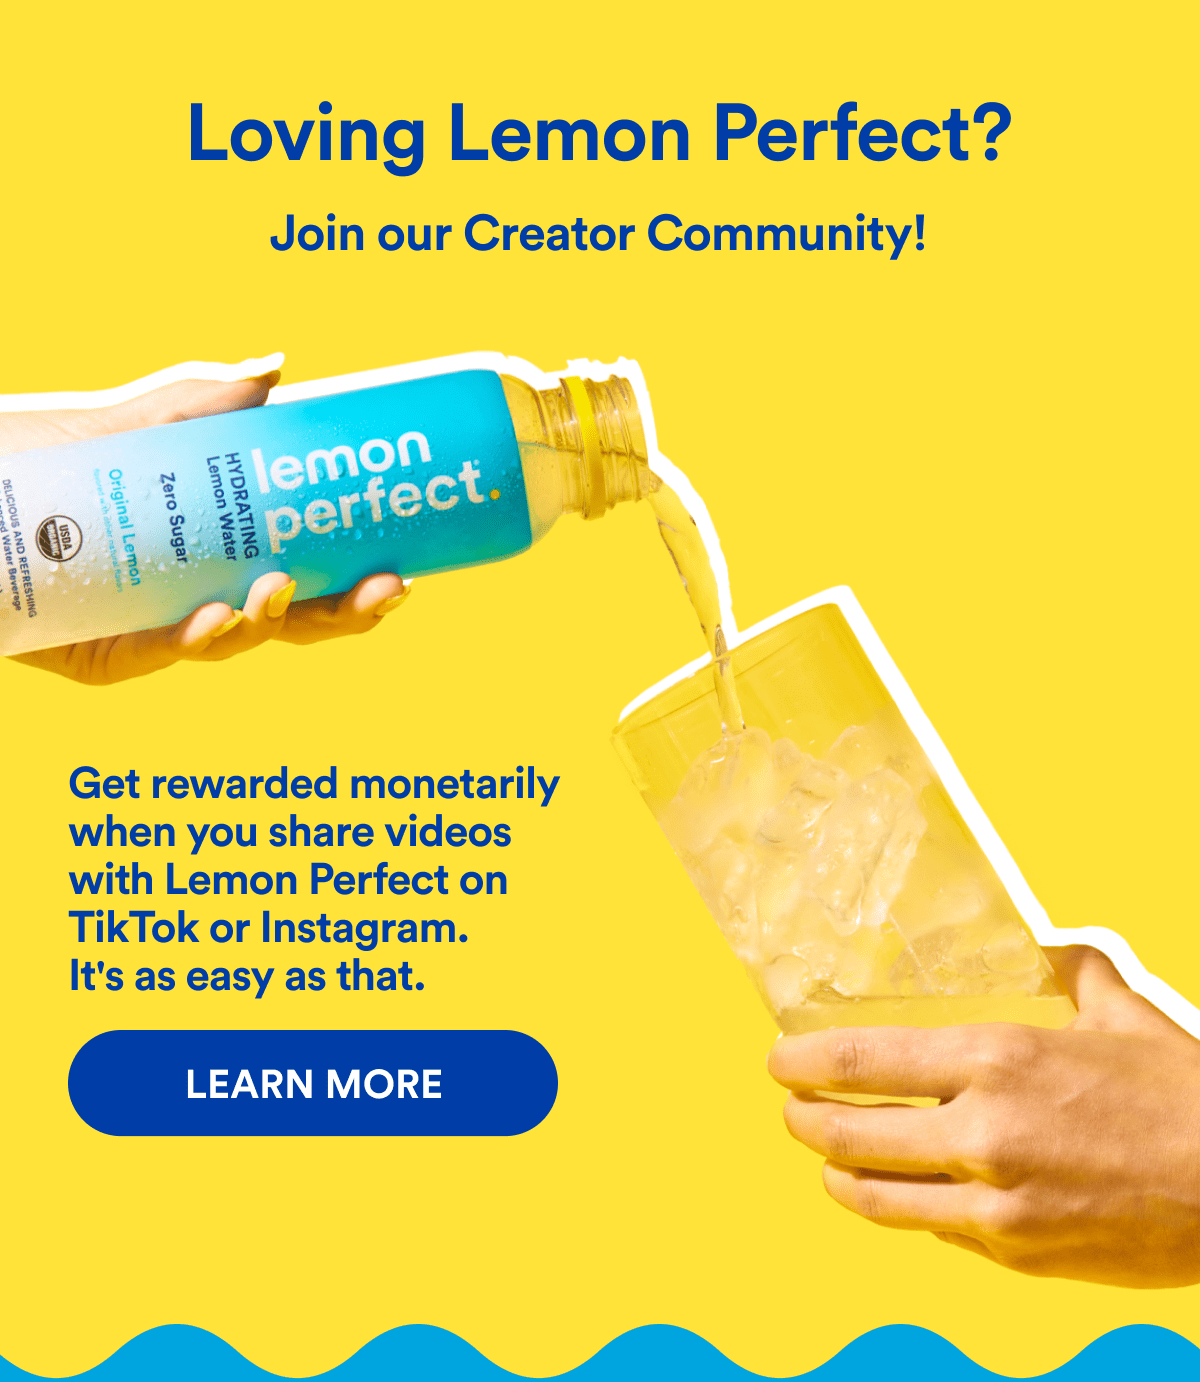 Loving Lemon Perfect? Join Our Creater Community | Get rewarded monetarily when you share videos with Lemon Perfect on Tiktok or Instagram. It's as easy as that | Learn More